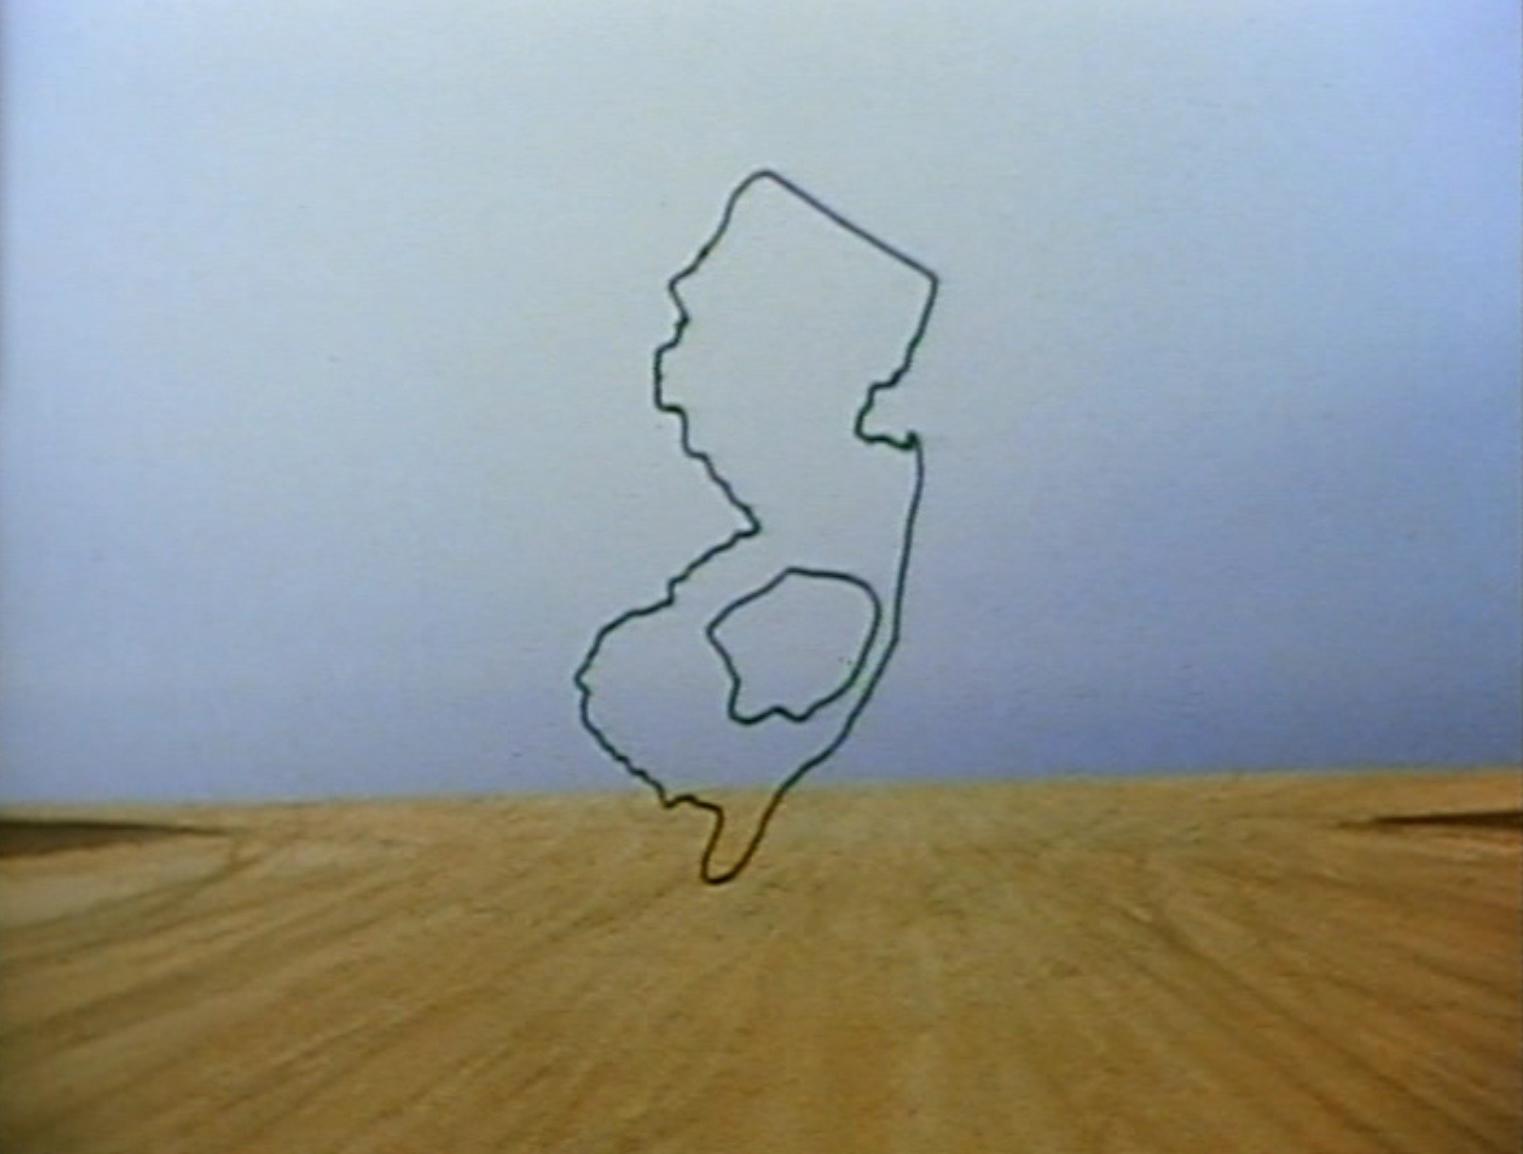 A still from the film Pine Barrens showing an outline of the state of New Jersey superimposed over a stark landscape.  